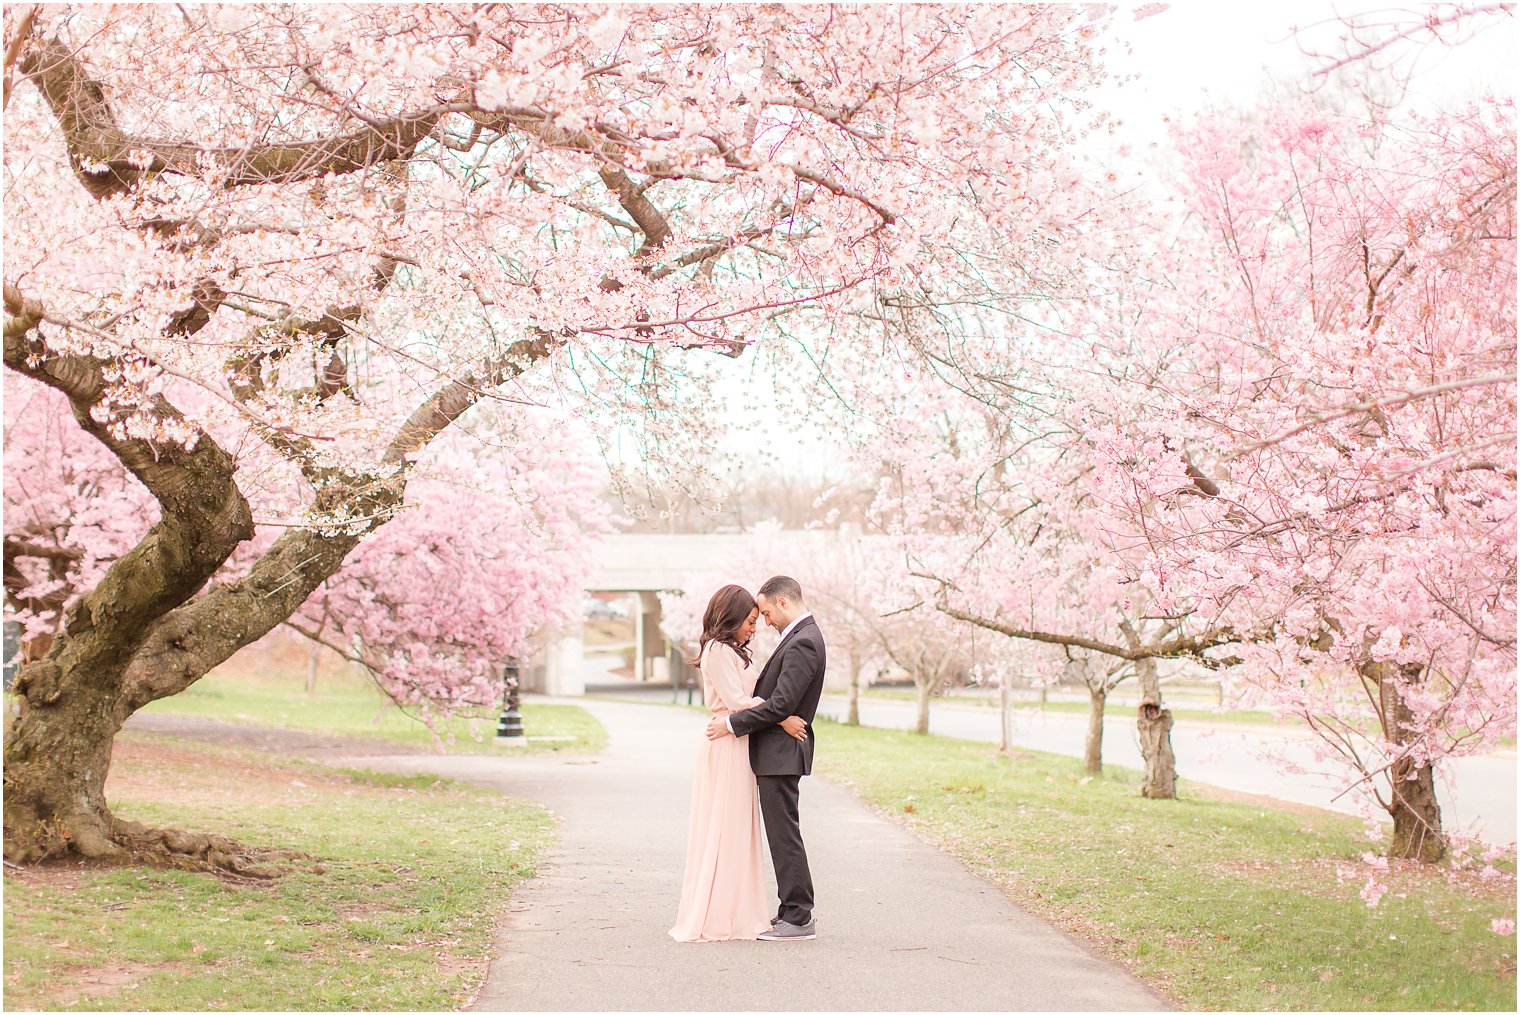 romantic engagement photos with cherry blossoms